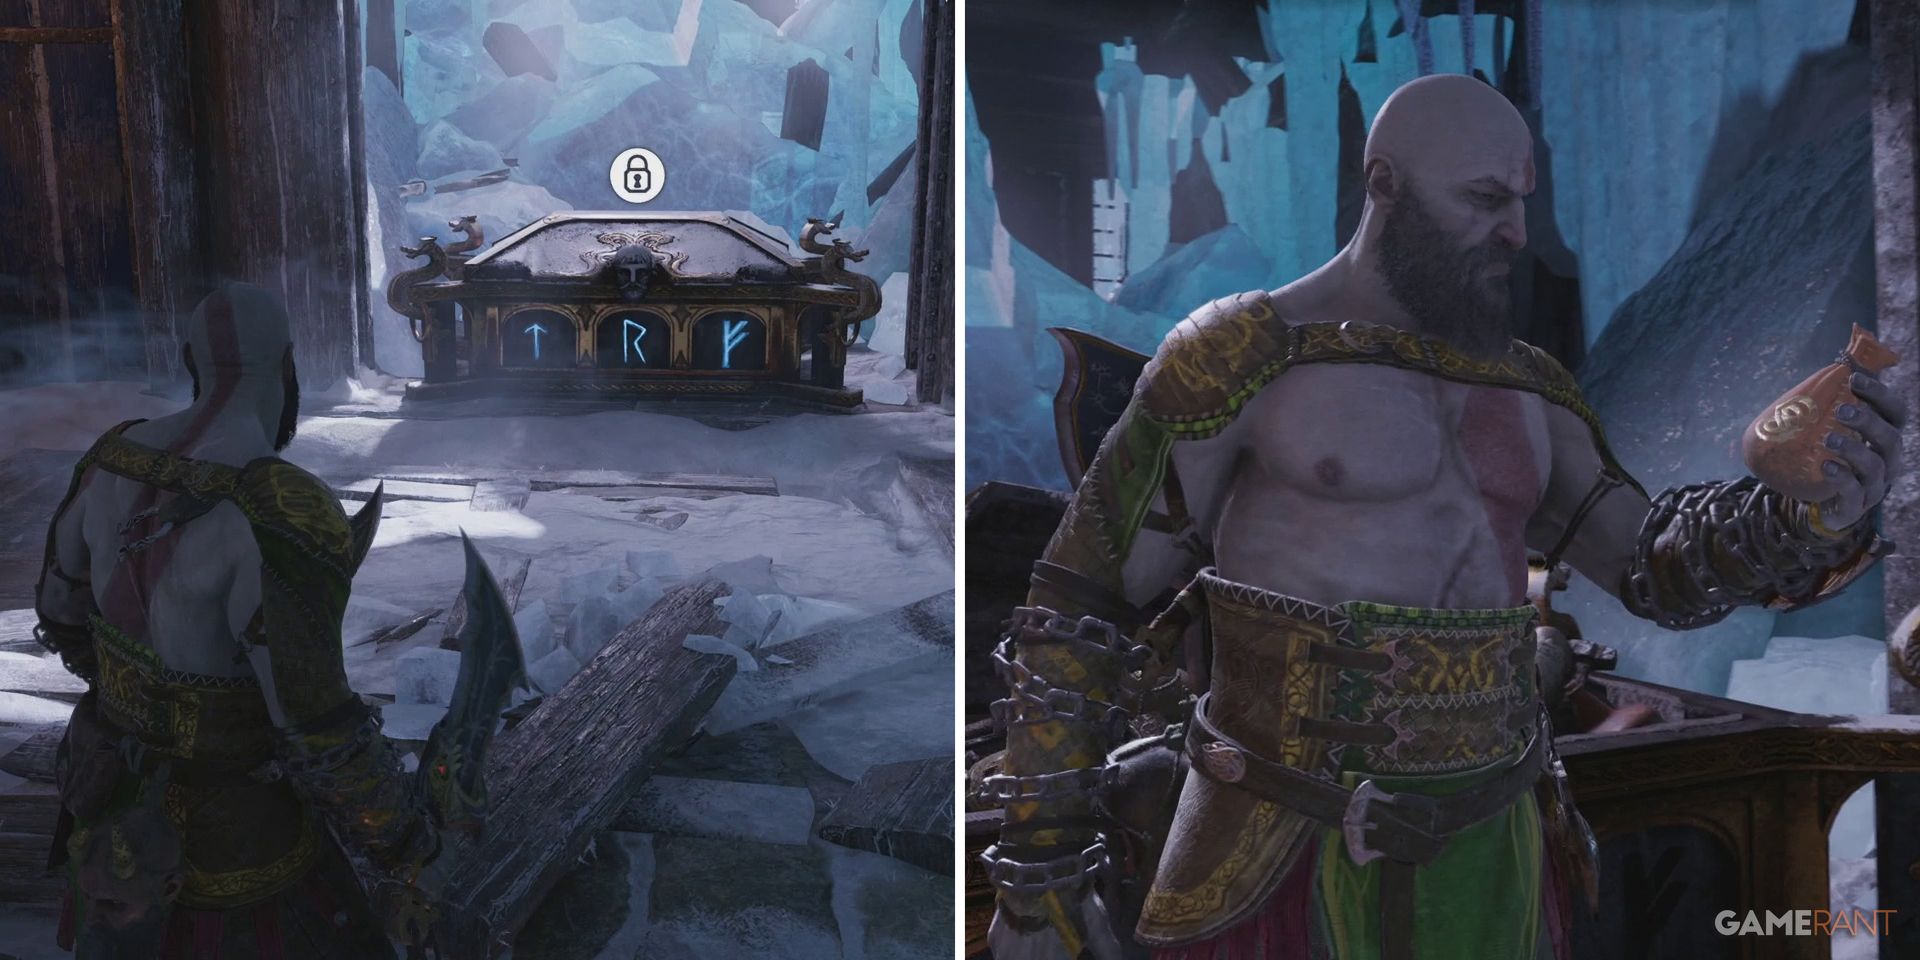 God of War Ragnarok 'The Broken Prison' guide and puzzle solutions